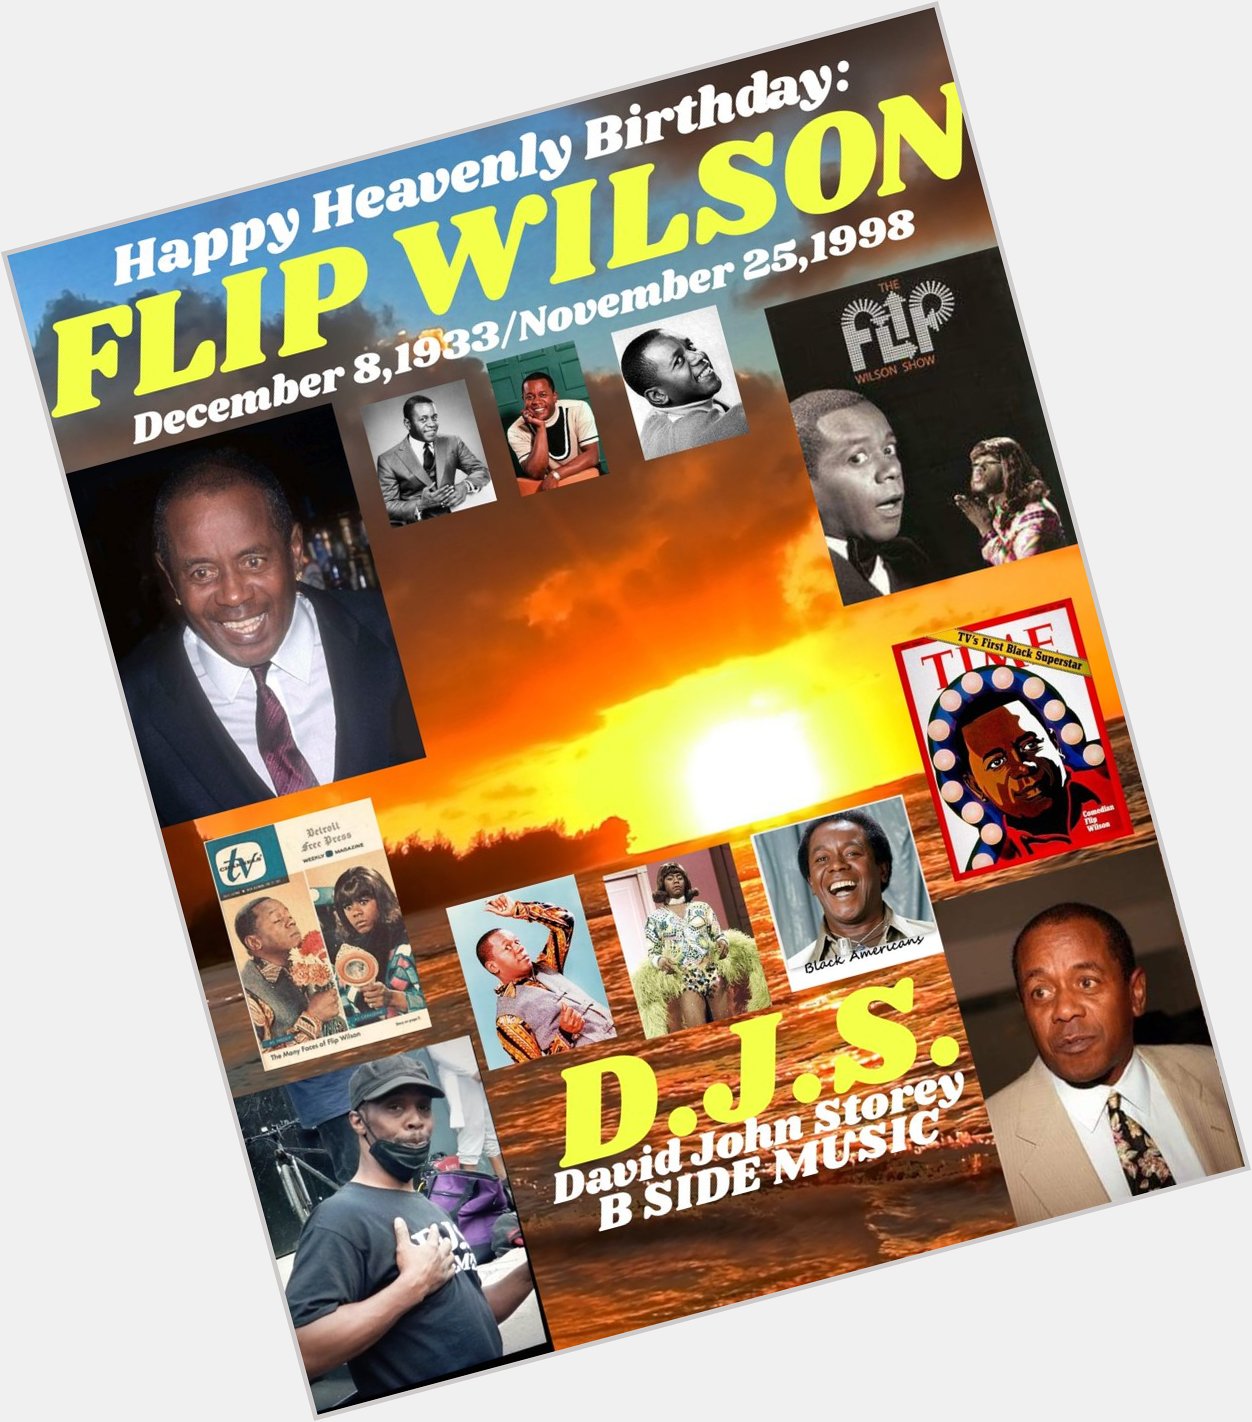 I(D.J.S.)\"B SIDE\" taking time to say Happy Heavenly Birthday to Comedian/Actor: \"FLIP WILSON\". 